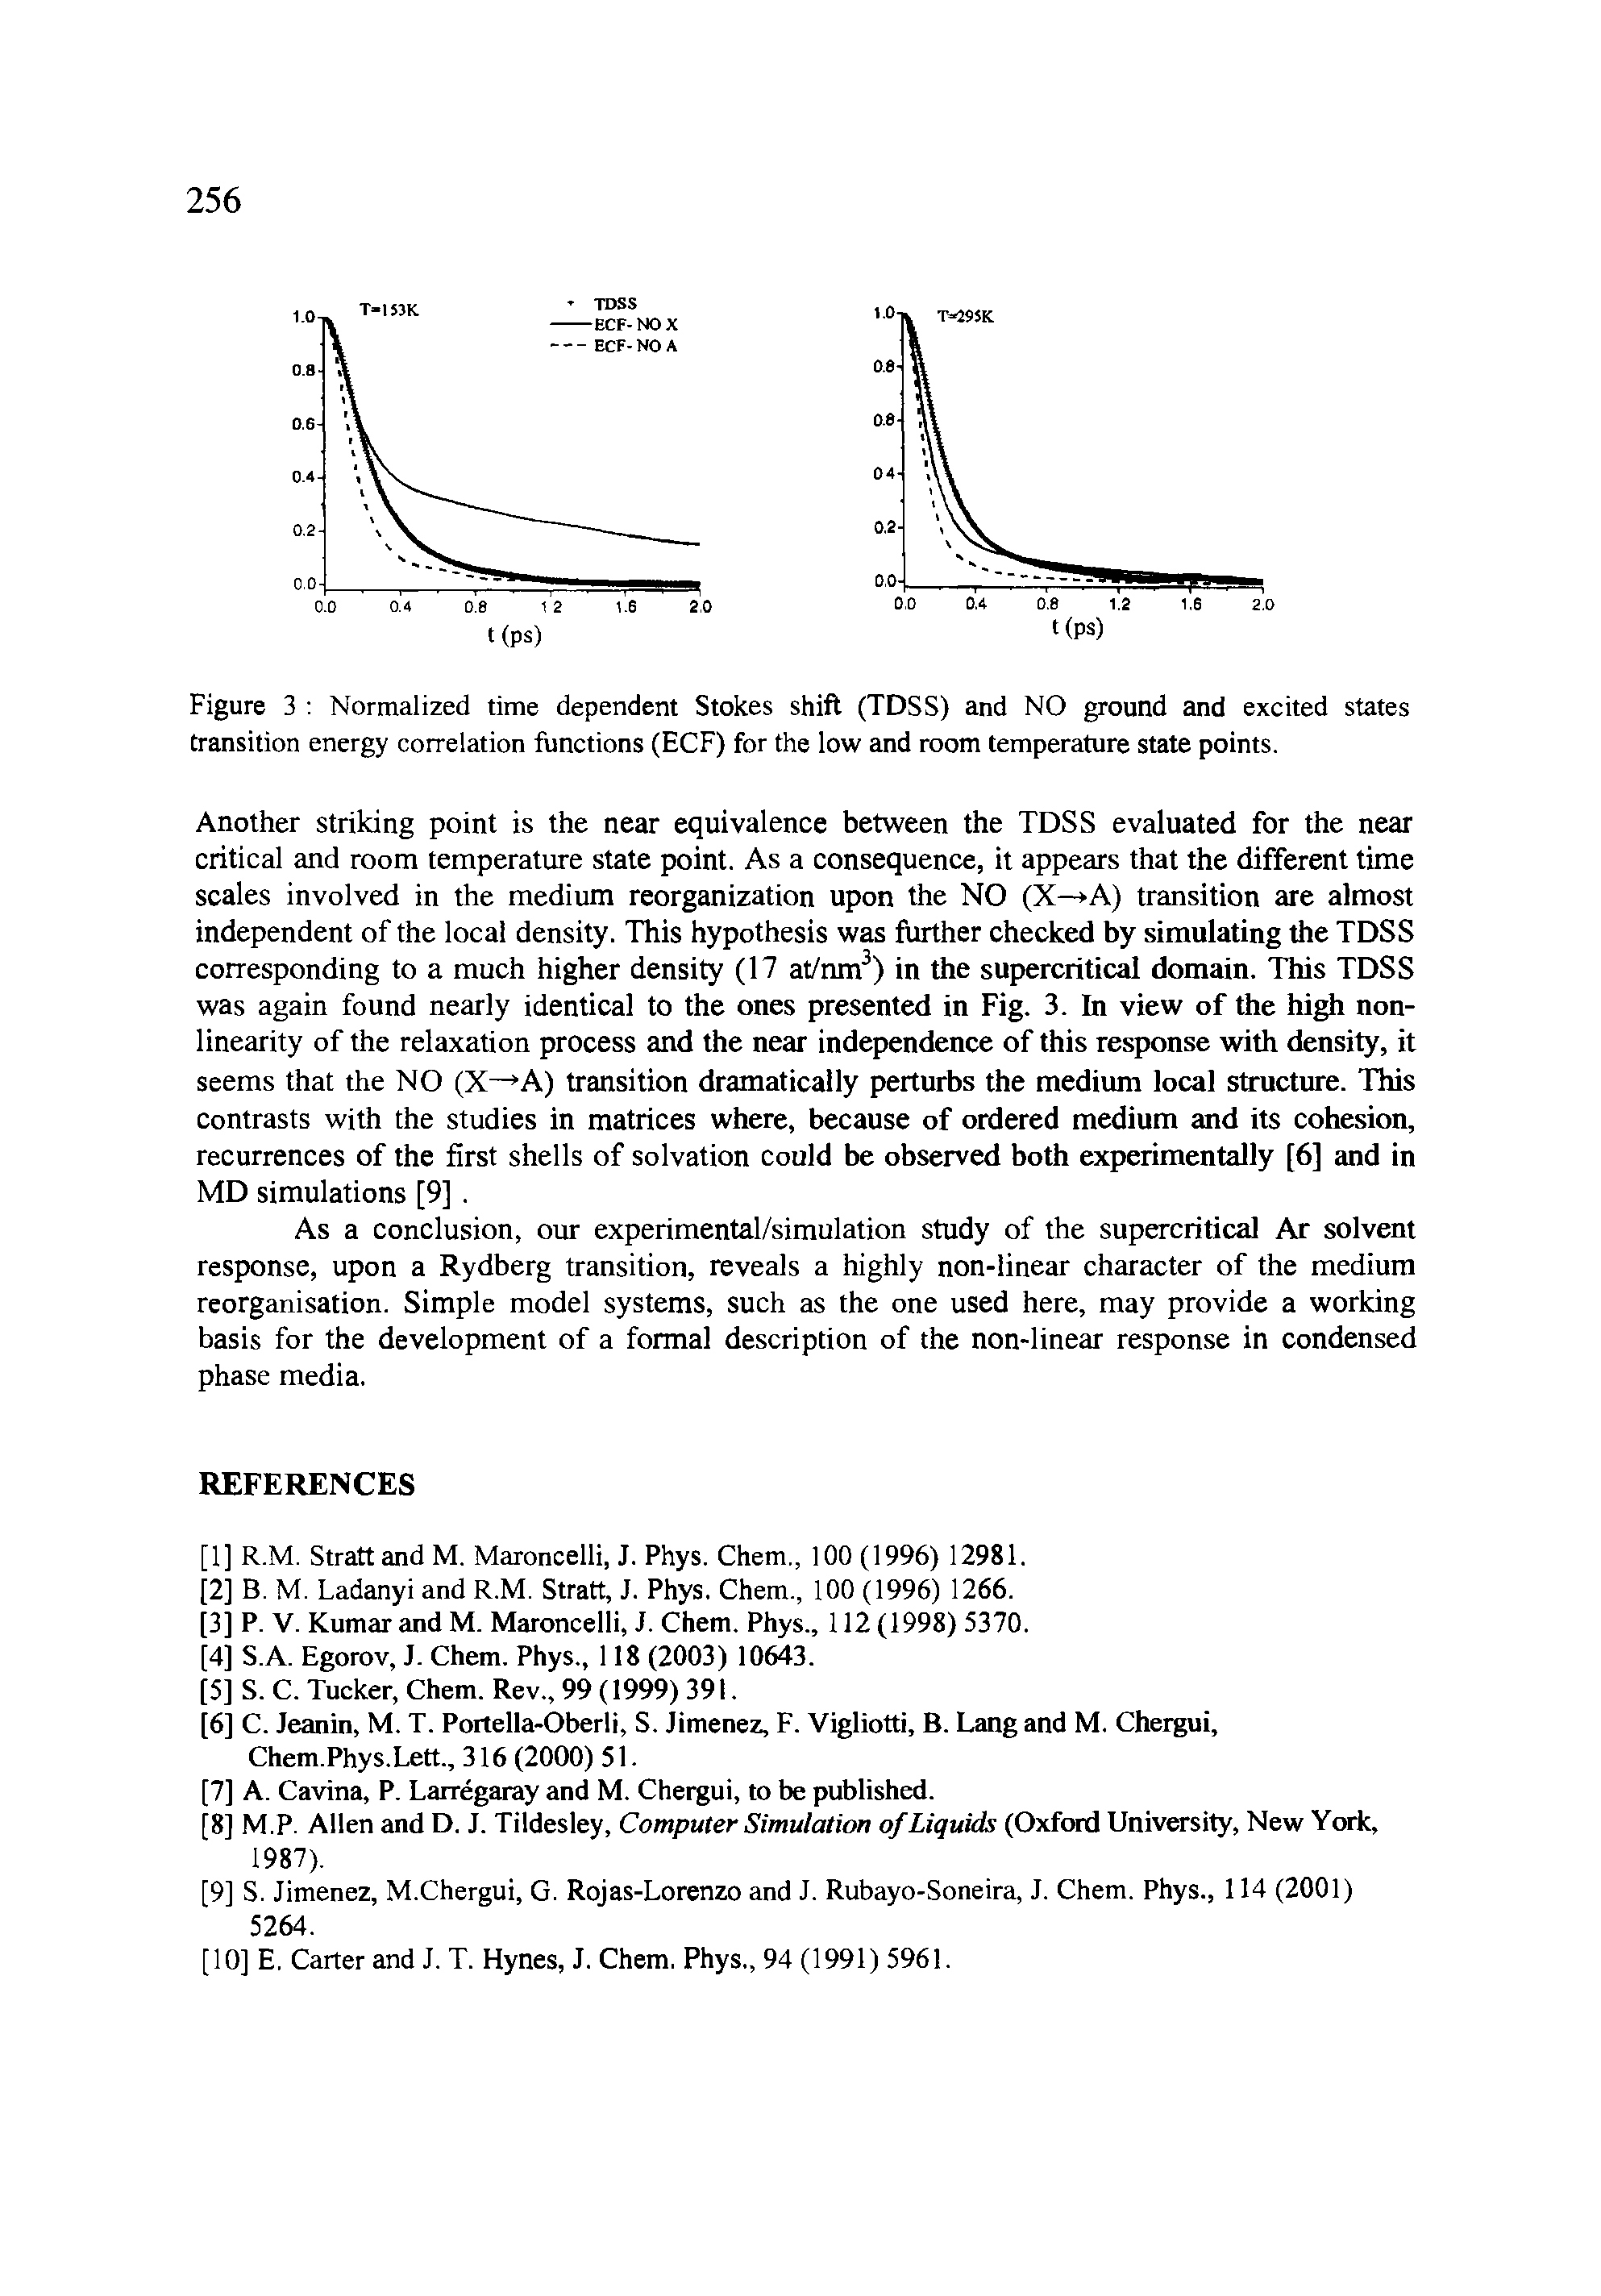 Figure 3 Normalized time dependent Stokes shift (TDSS) and NO ground and excited states transition energy correlation functions (ECF) for the low and room temperature state points.